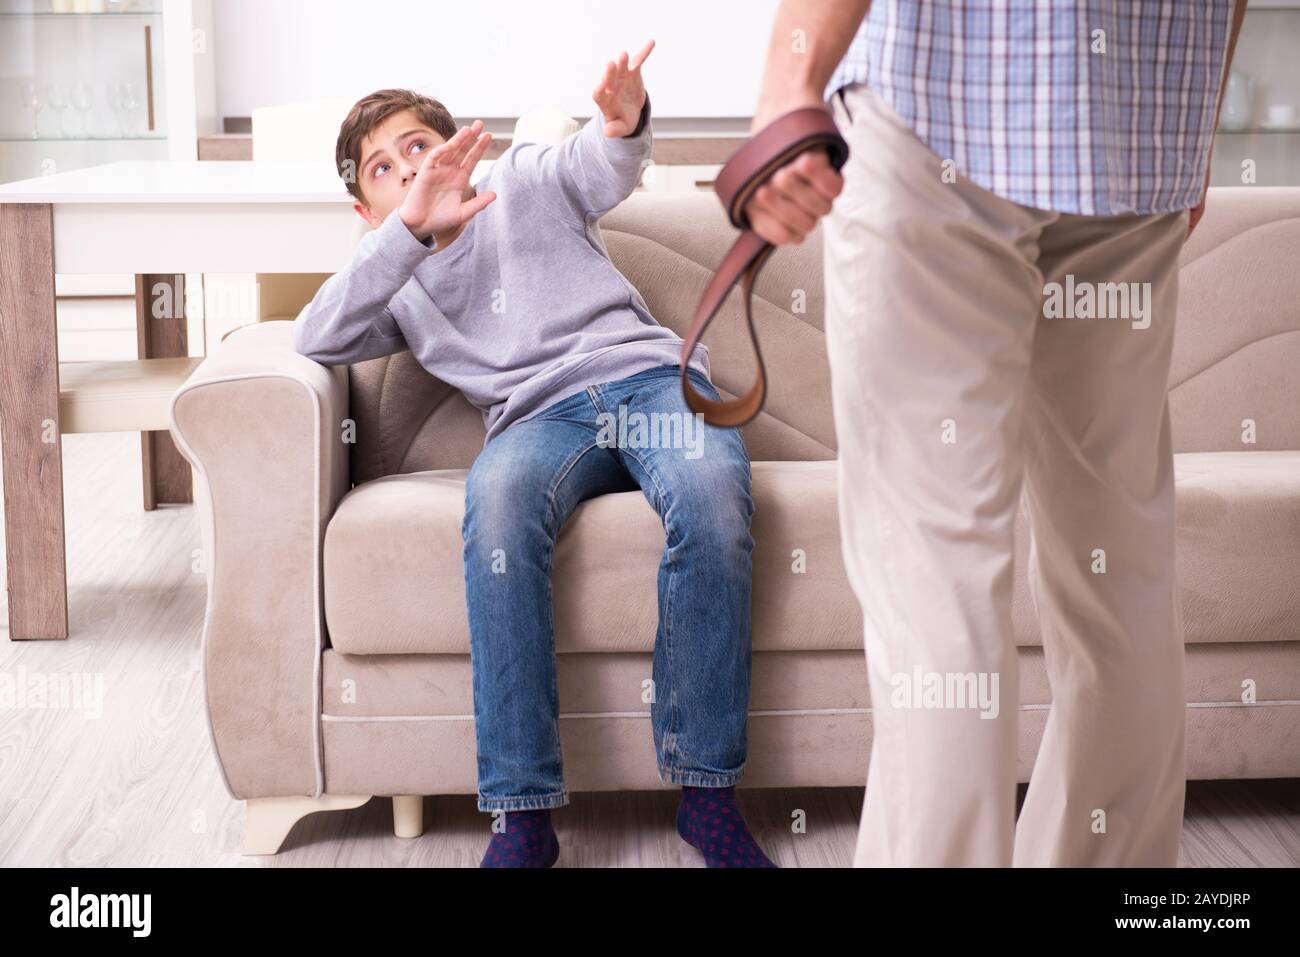 - punishing Father Alamy his and sone Photo Stock beating